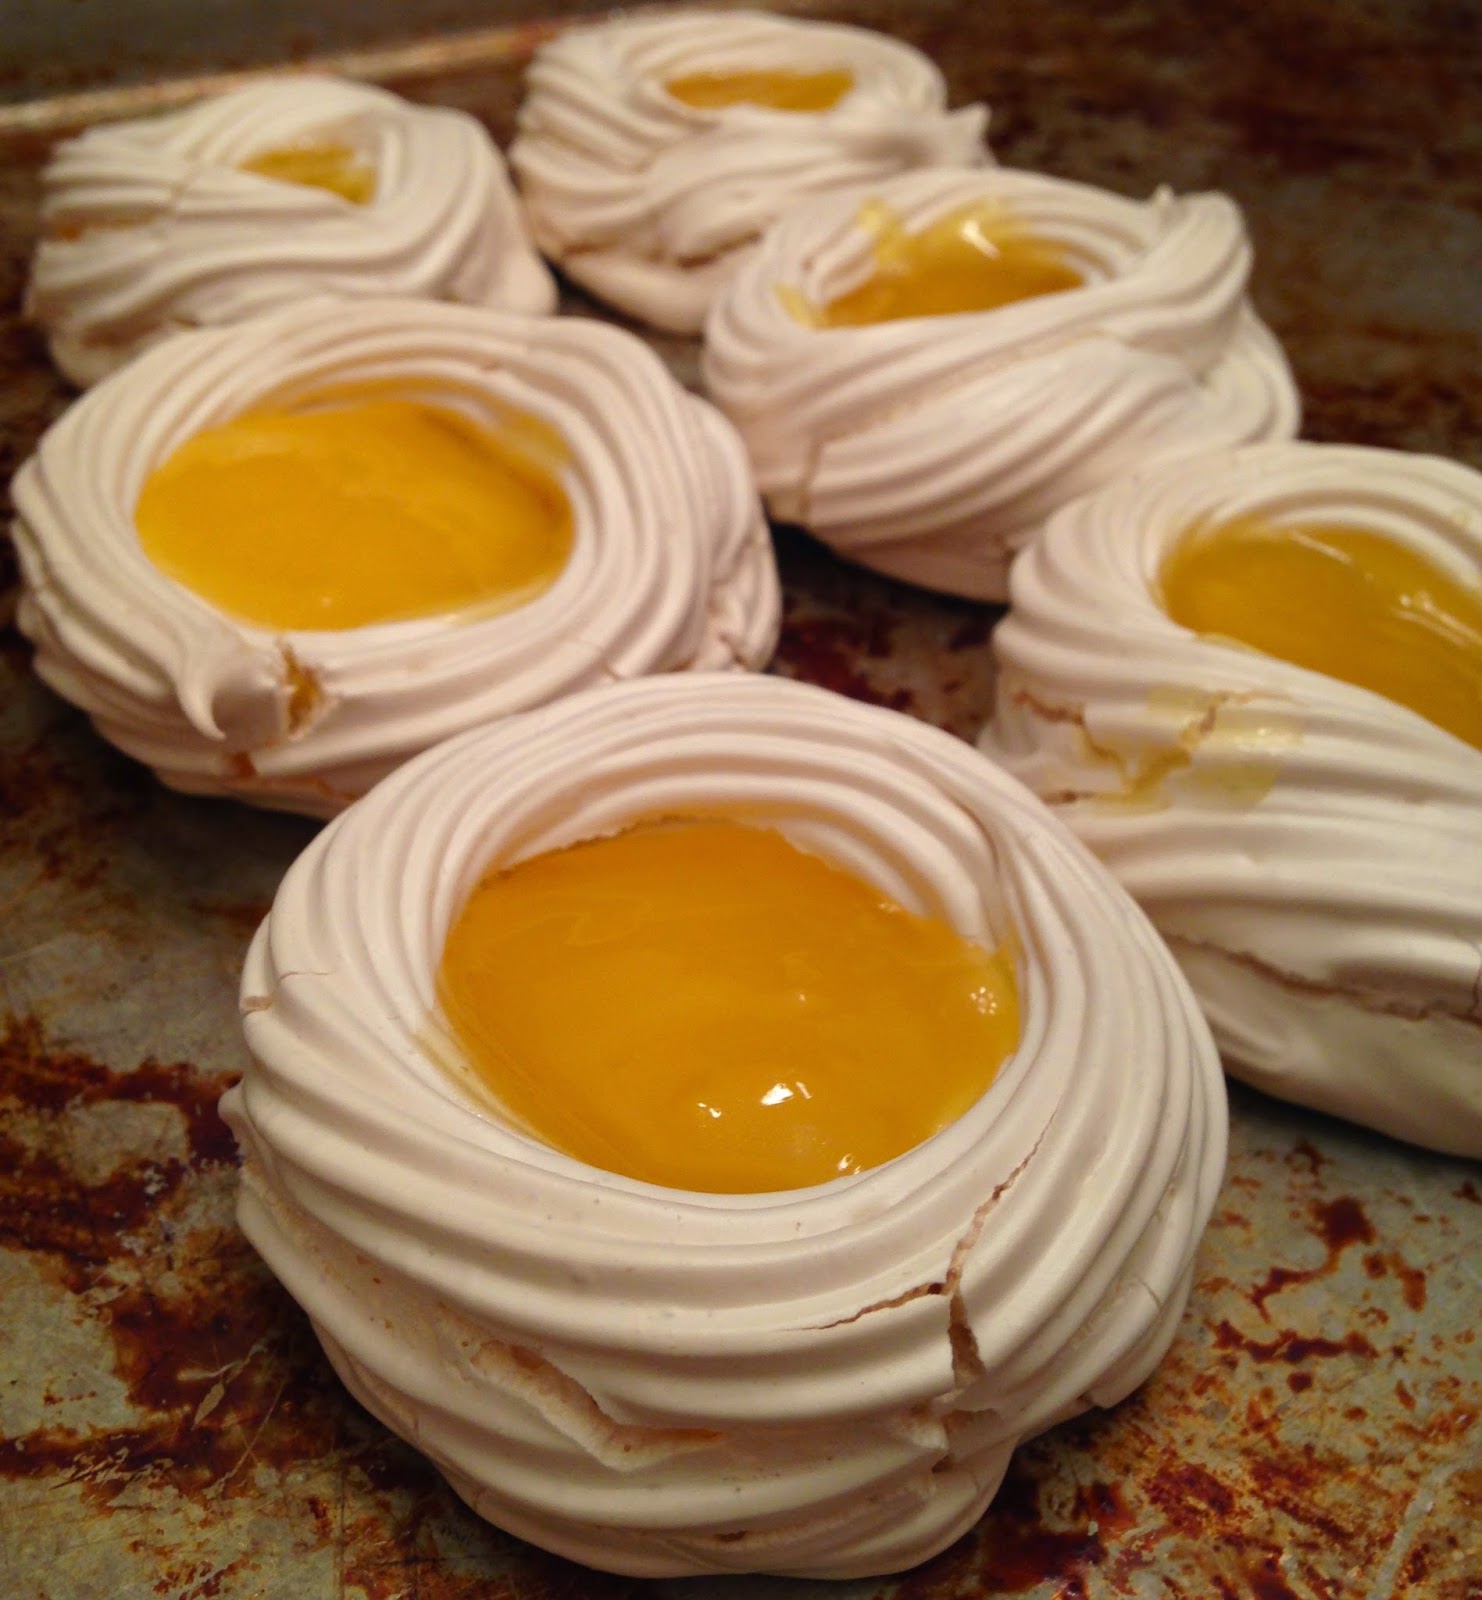 Meringue Nests With Lemon Curd The Self Trained Chef